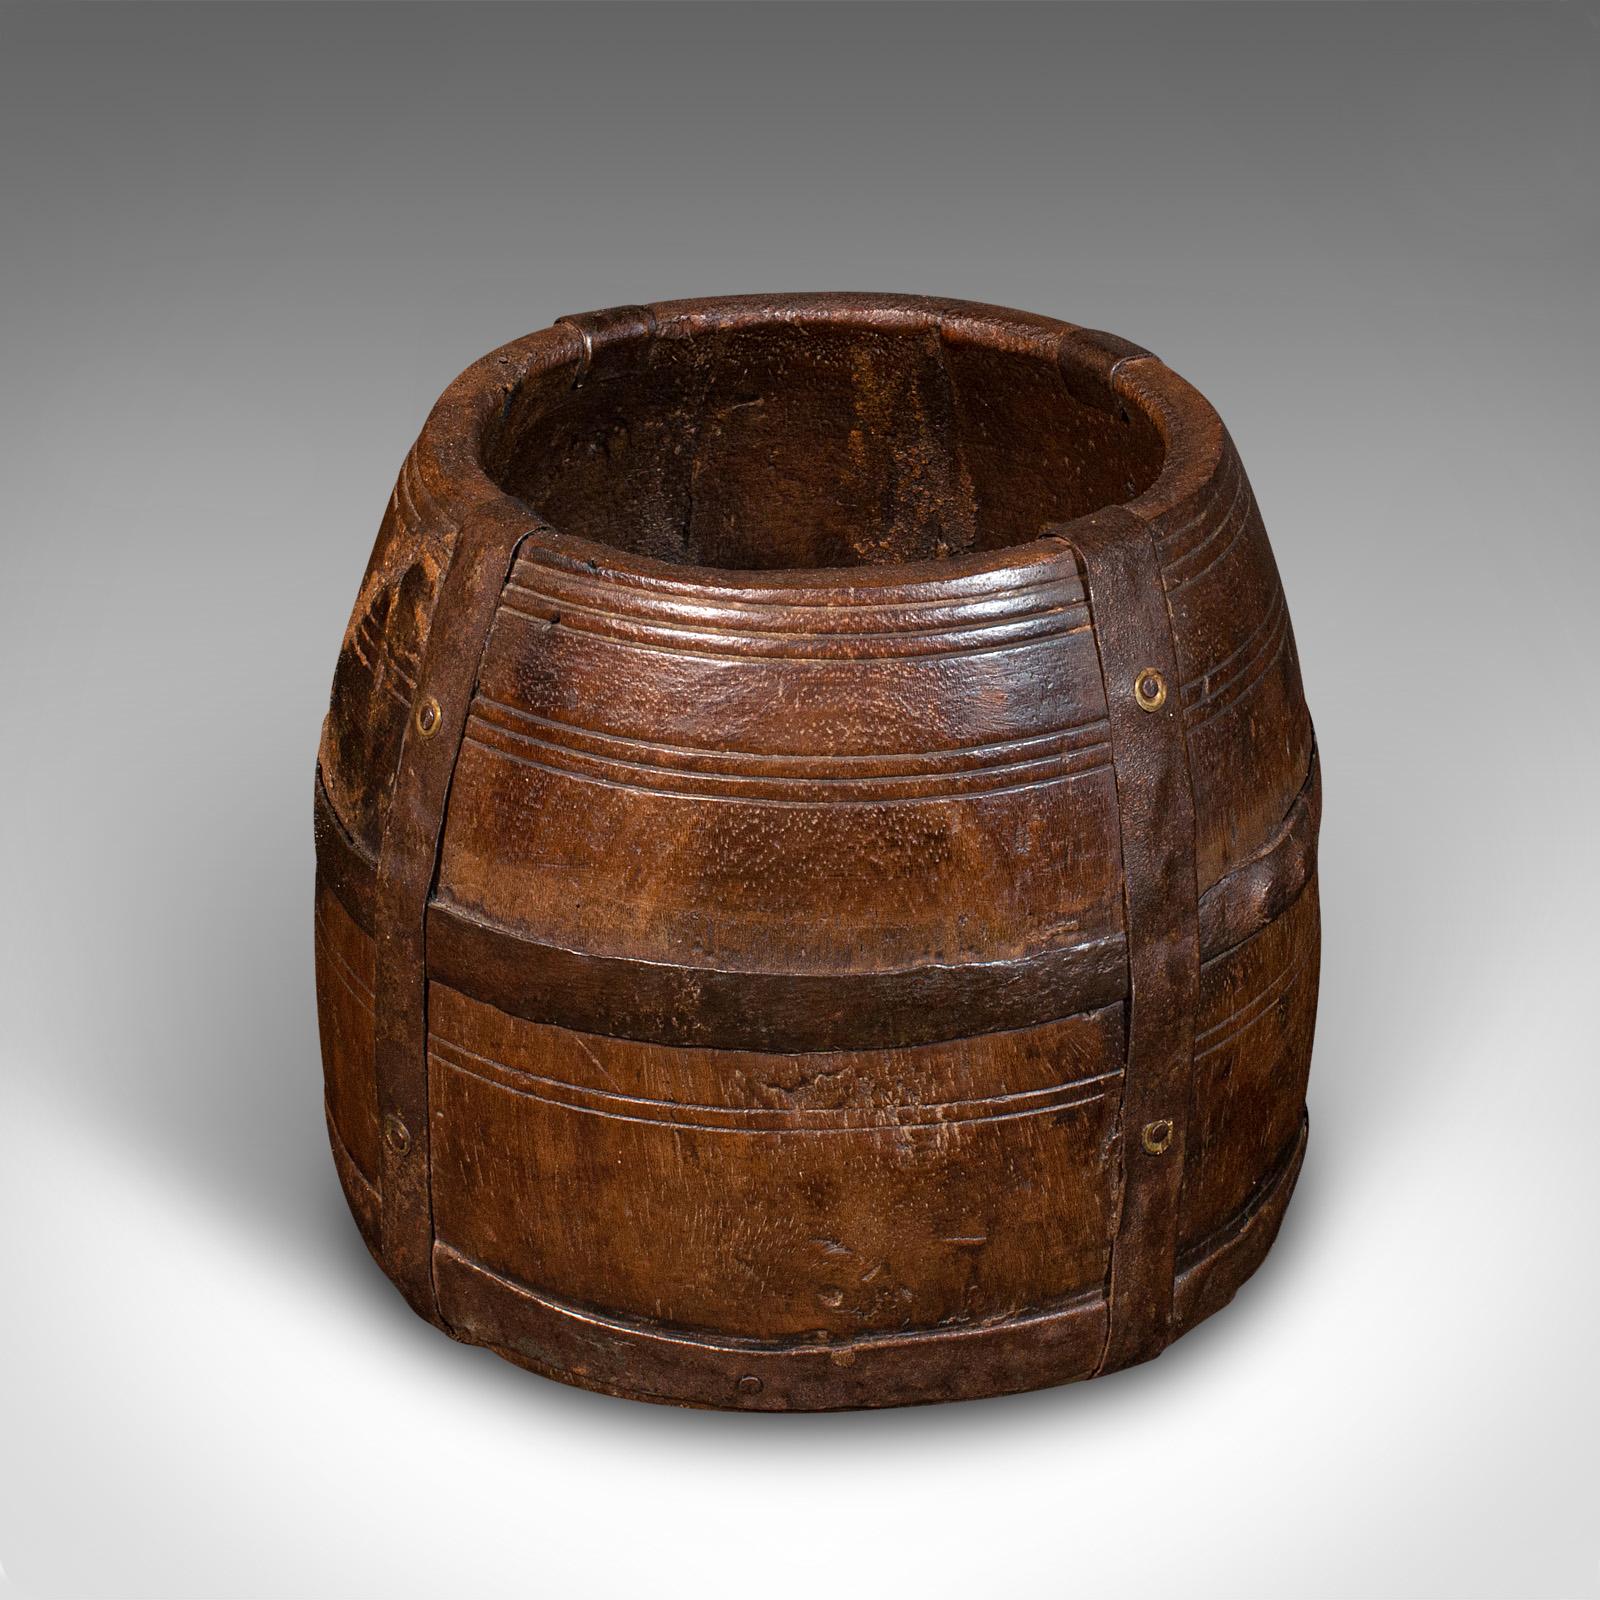 This is an antique tribal jardiniere. An African, ironwood and cast iron bound decorative bowl, dating to the late Victorian period, circa 1900.

Wonderfully naive tribal craftsmanship and appearance
Displays a desirable aged patina